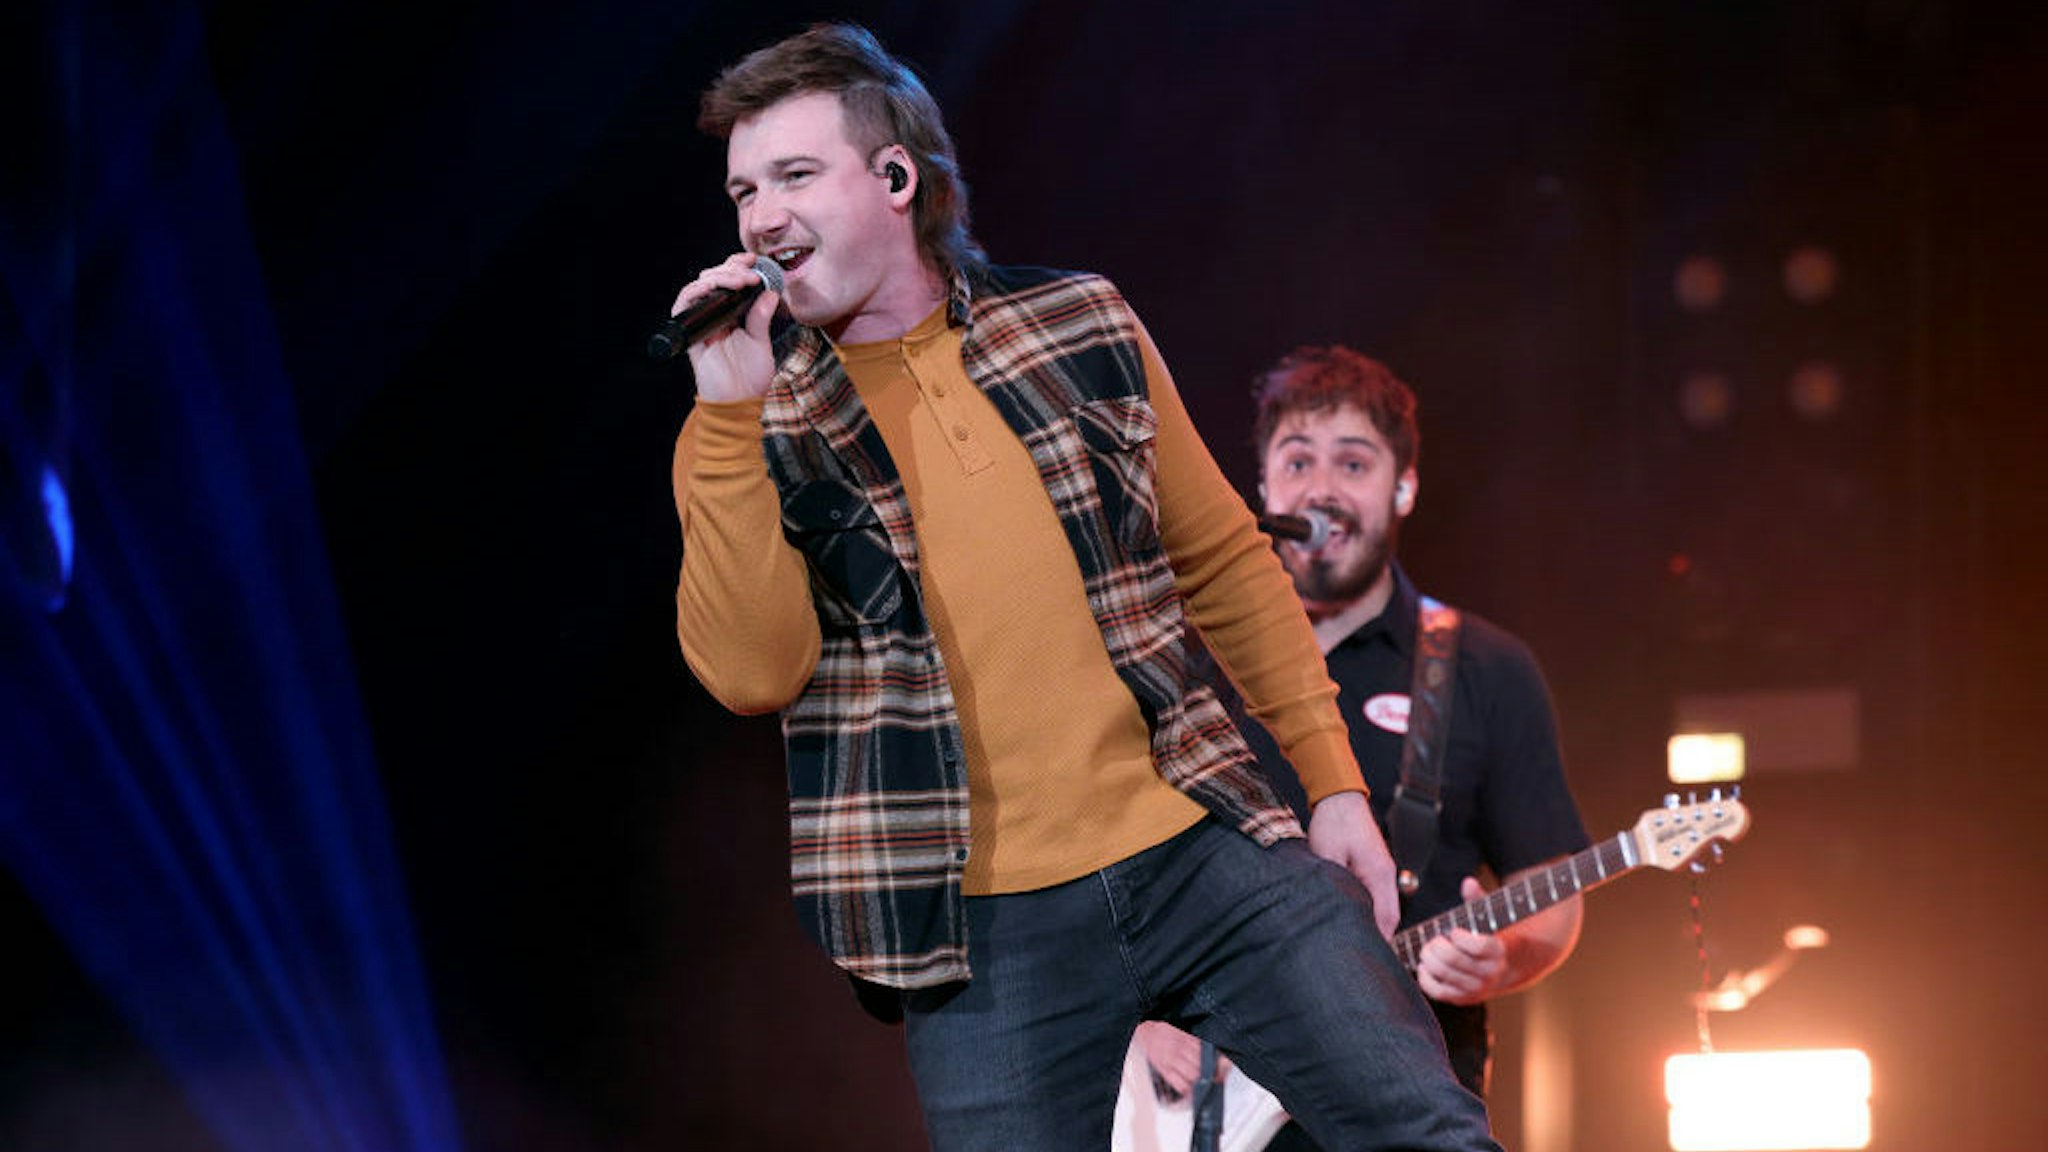 NASHVILLE, TENNESSEE - JANUARY 12: Morgan Wallen performs onstage at the Ryman Auditorium on January 12, 2021 in Nashville, Tennessee. (Photo by John Shearer/Getty Images for Ryman Auditorium)